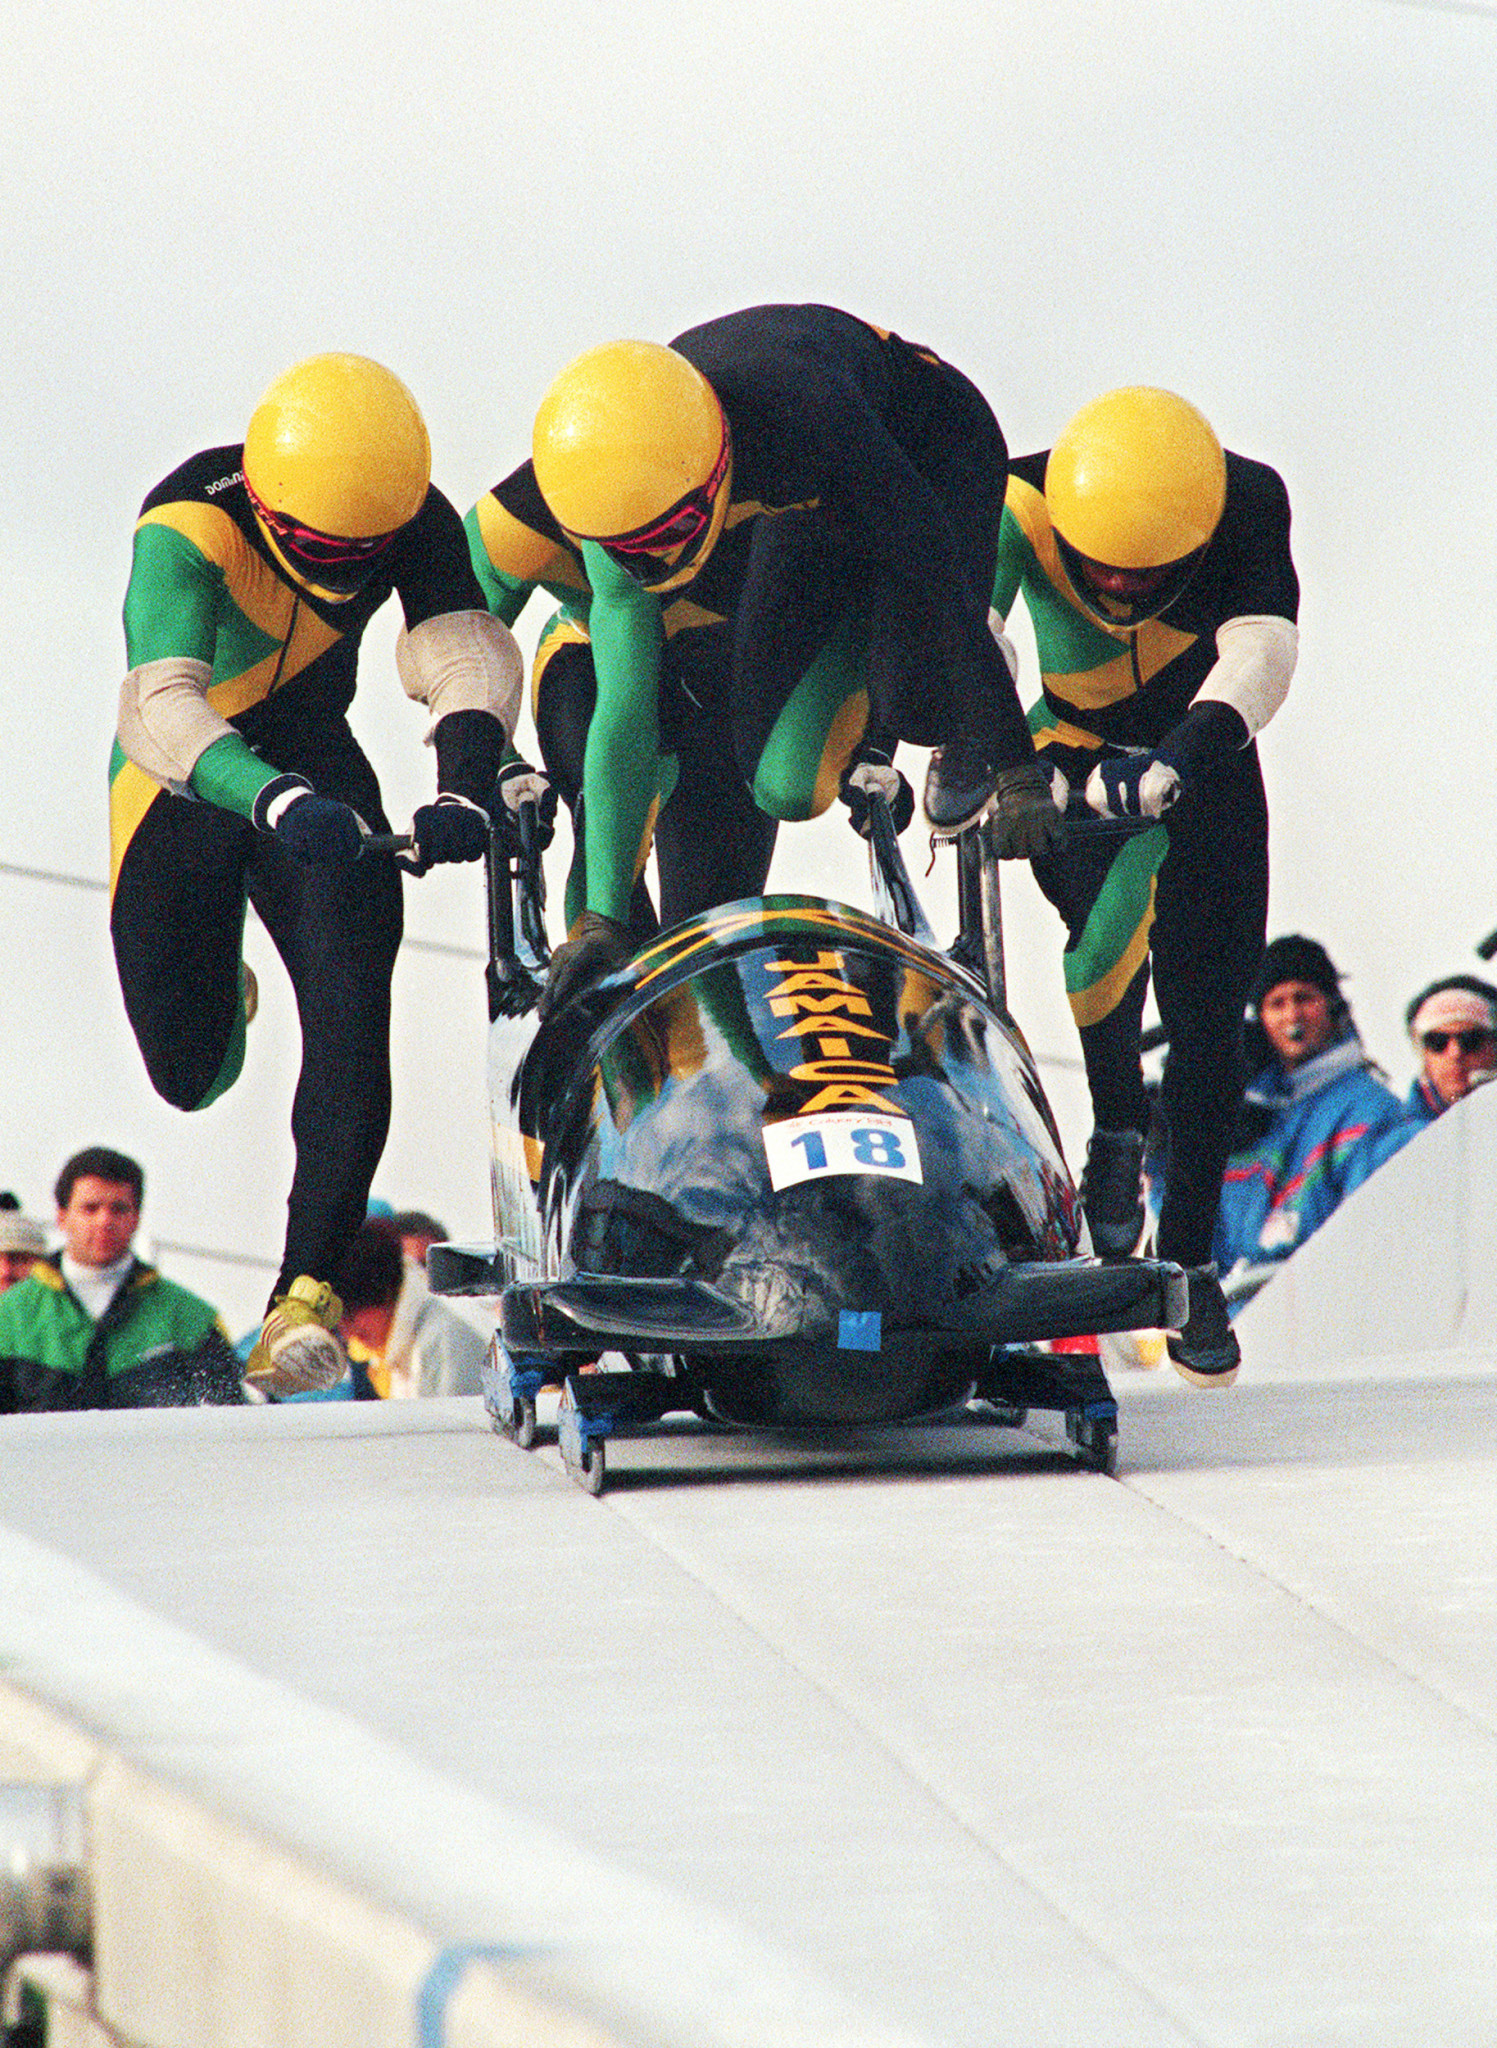 Nelson Chris Stokes was part of the Jamaica Cool Runnings team that competed at the 1988 Olympics in Calgary ©Getty Images